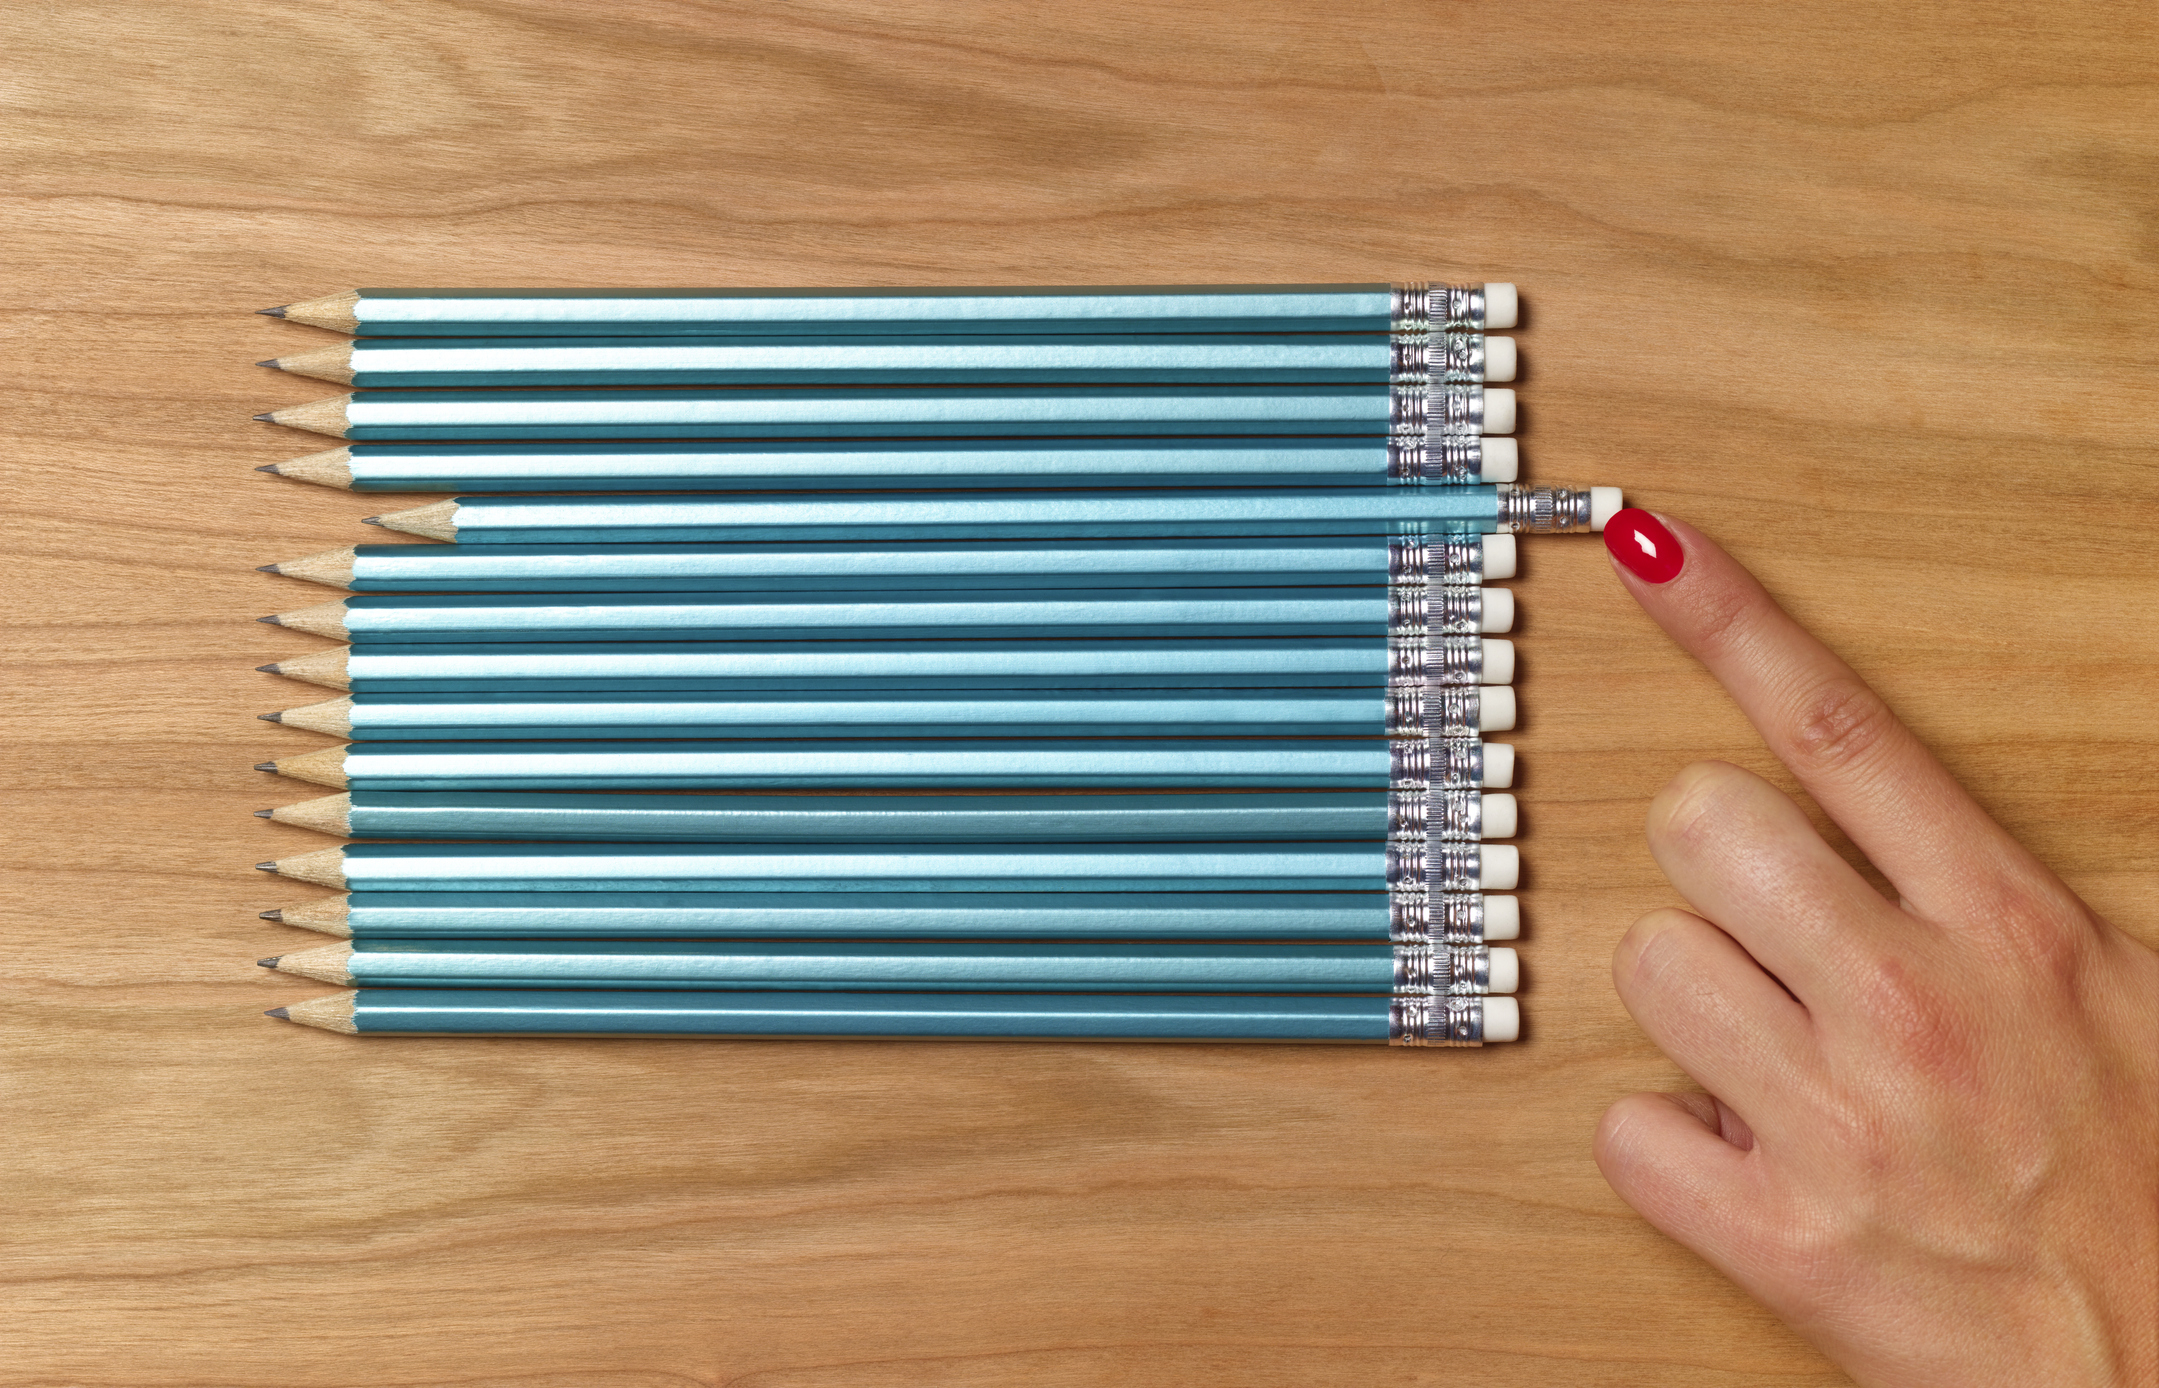 A finger pointing to one pencil among many aligned on a wooden surface, emphasizing selection or decision-making